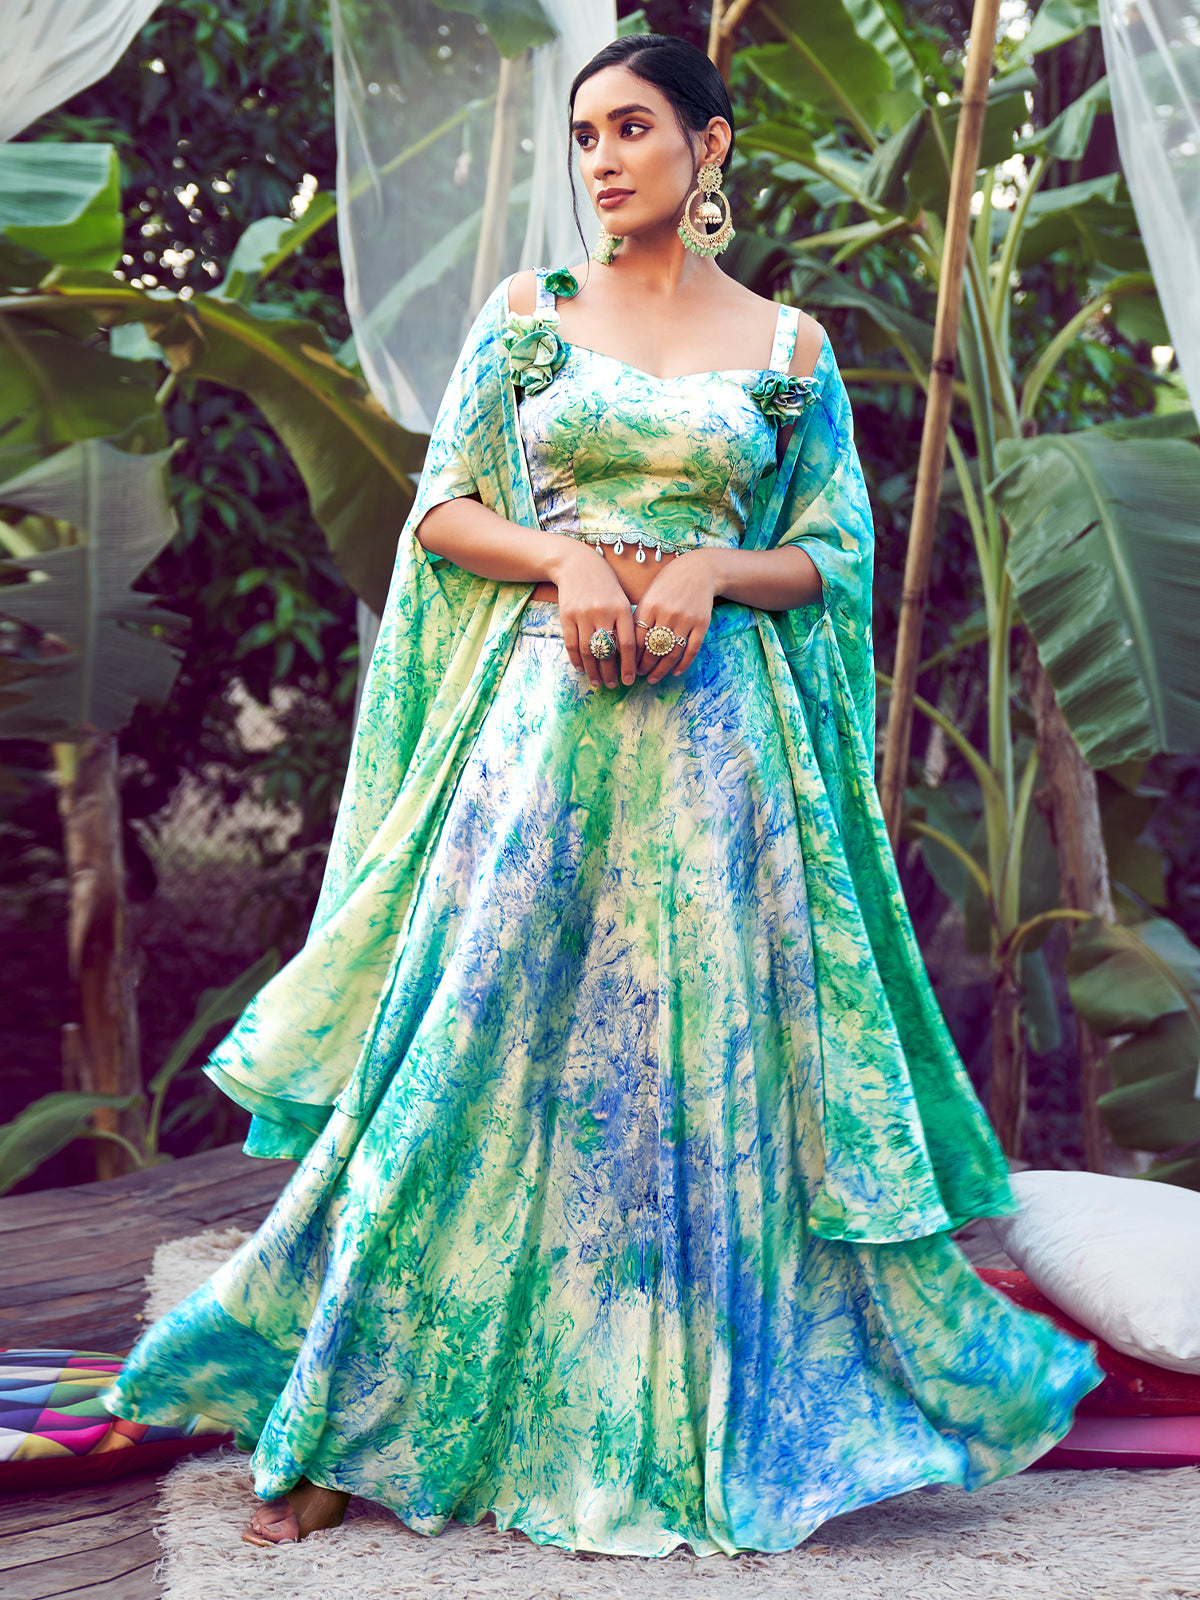 Mint Green Lehenga Choli With Embroidery With Print And Swar